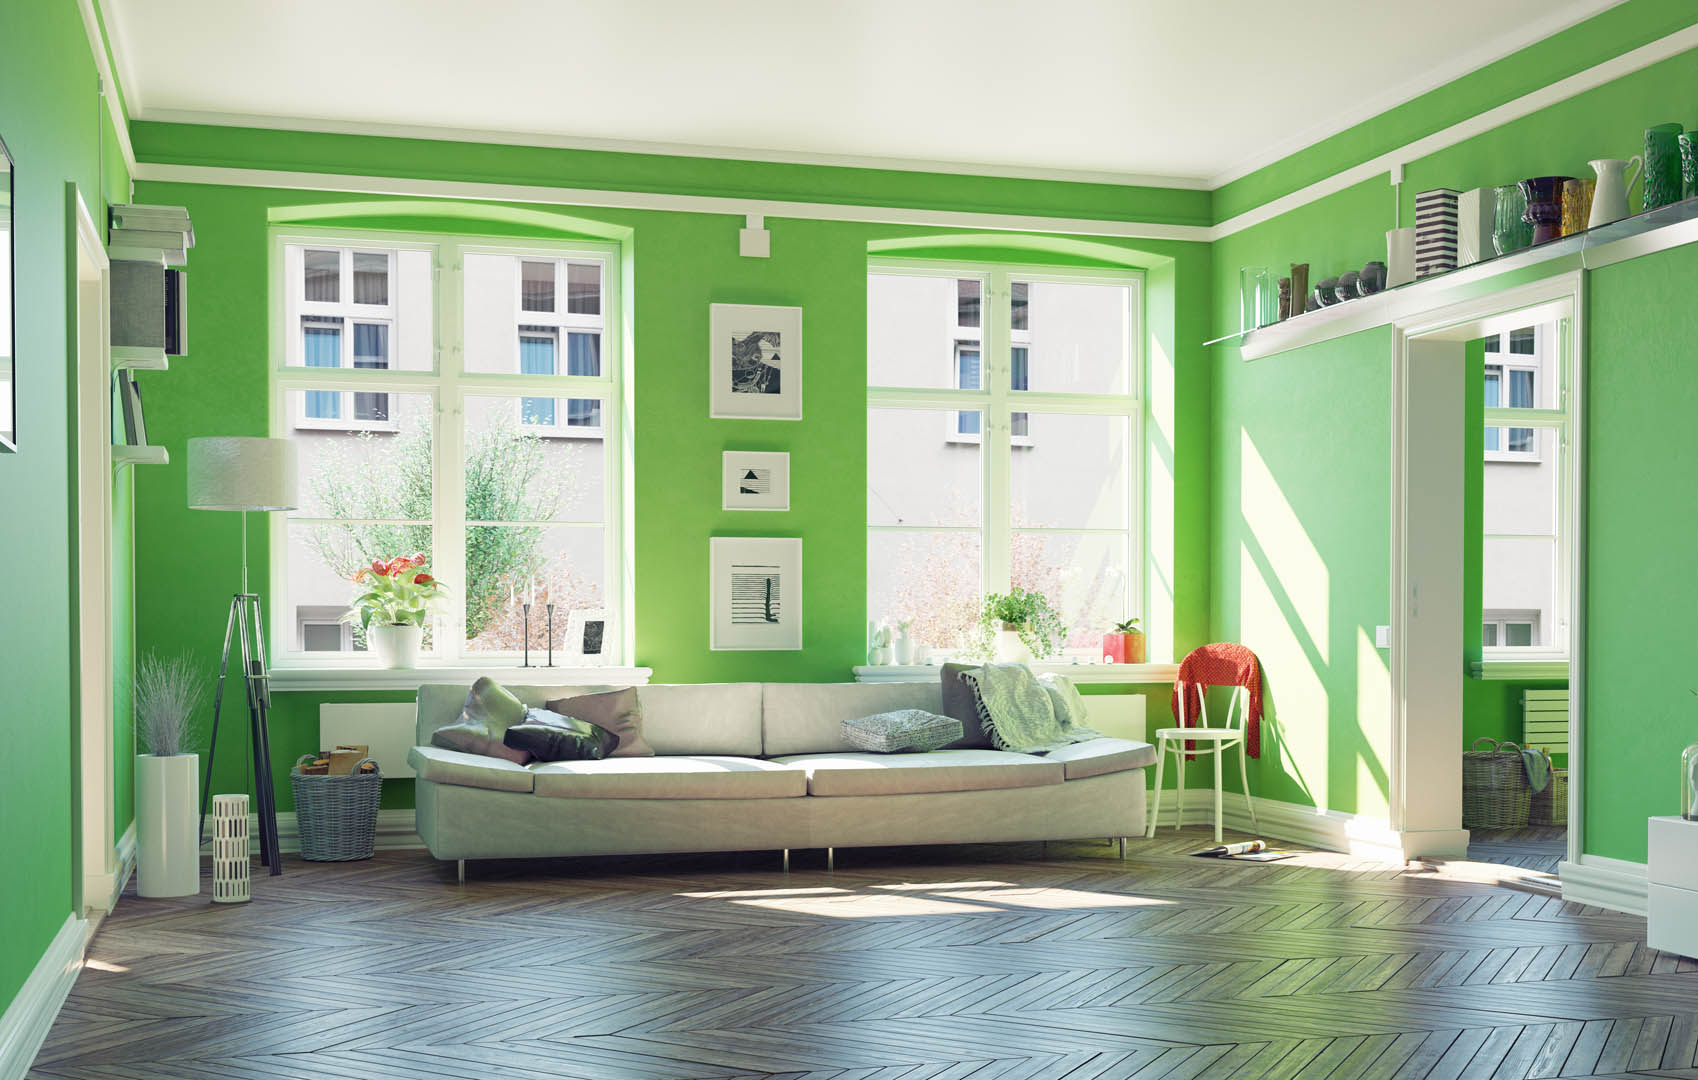 A living room with green walls and white furniture.